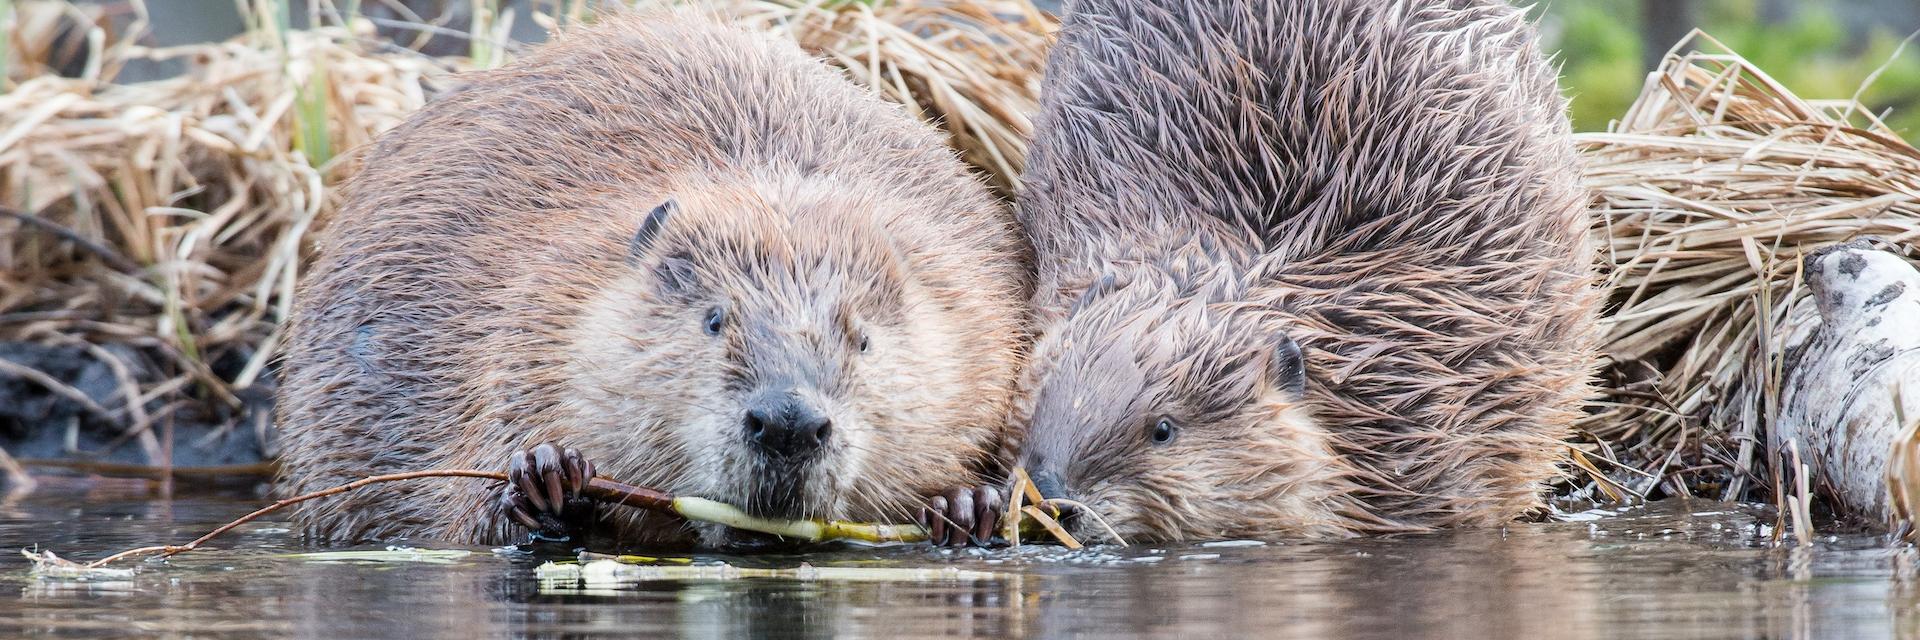 Two beavers at a stream/river bank with distorted reflections in the water. 